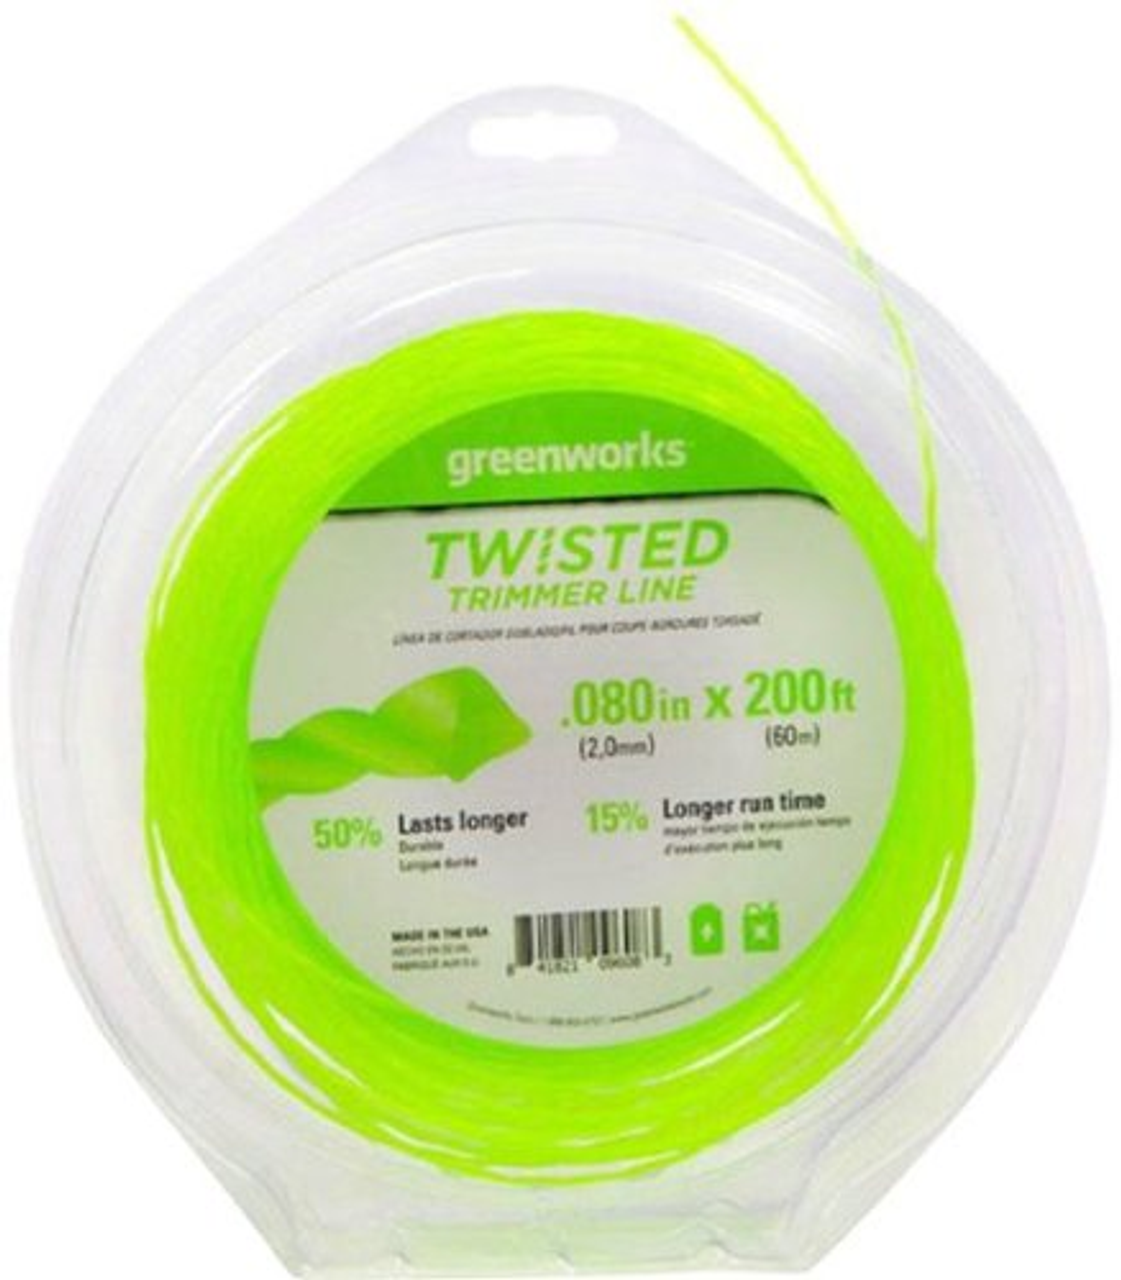 Greenworks - 0.080" Ultra Twisted String Trimmer Replacement Line (200 FT)